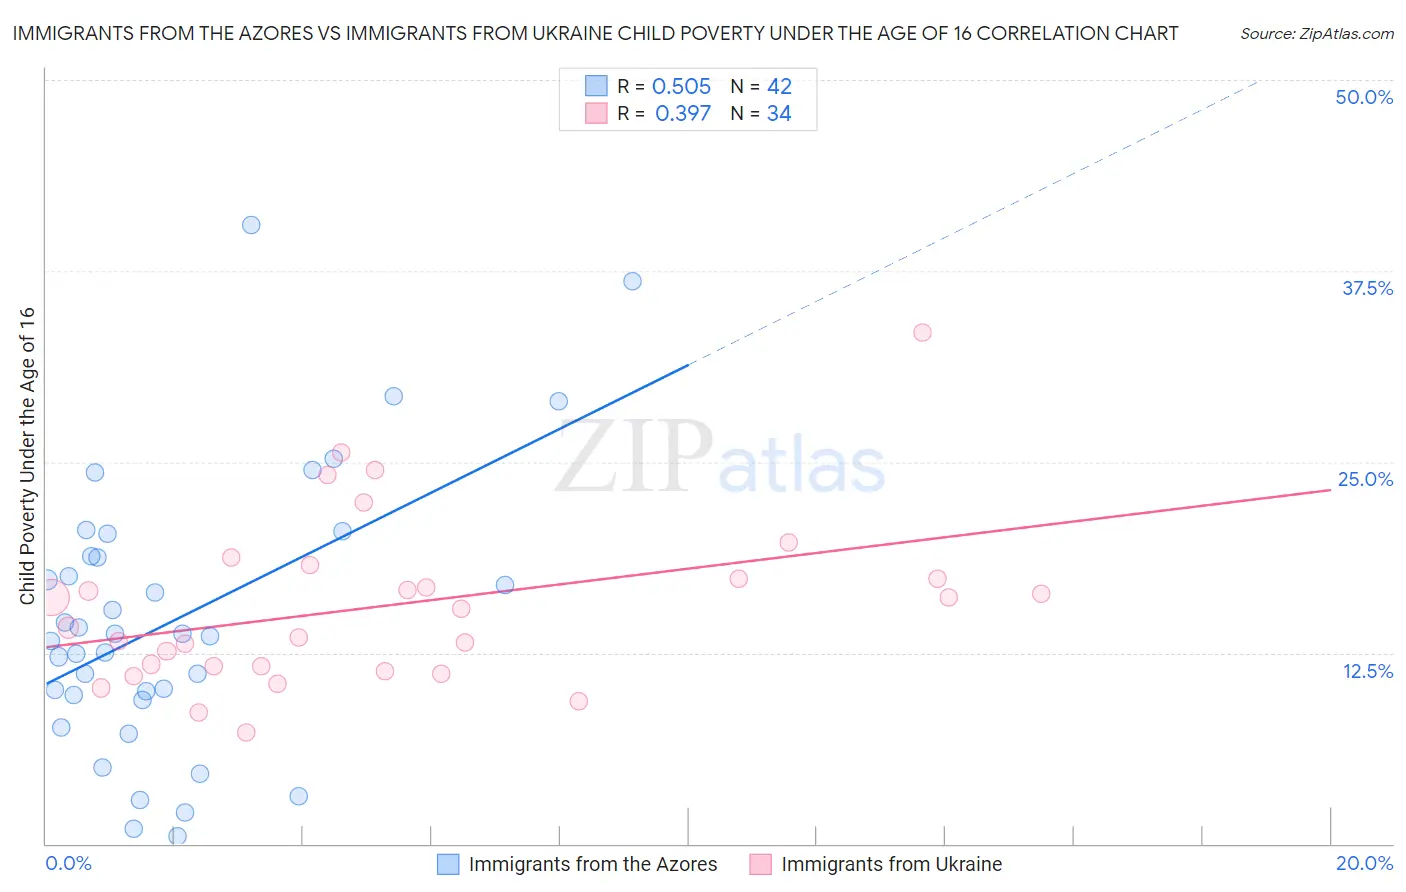 Immigrants from the Azores vs Immigrants from Ukraine Child Poverty Under the Age of 16